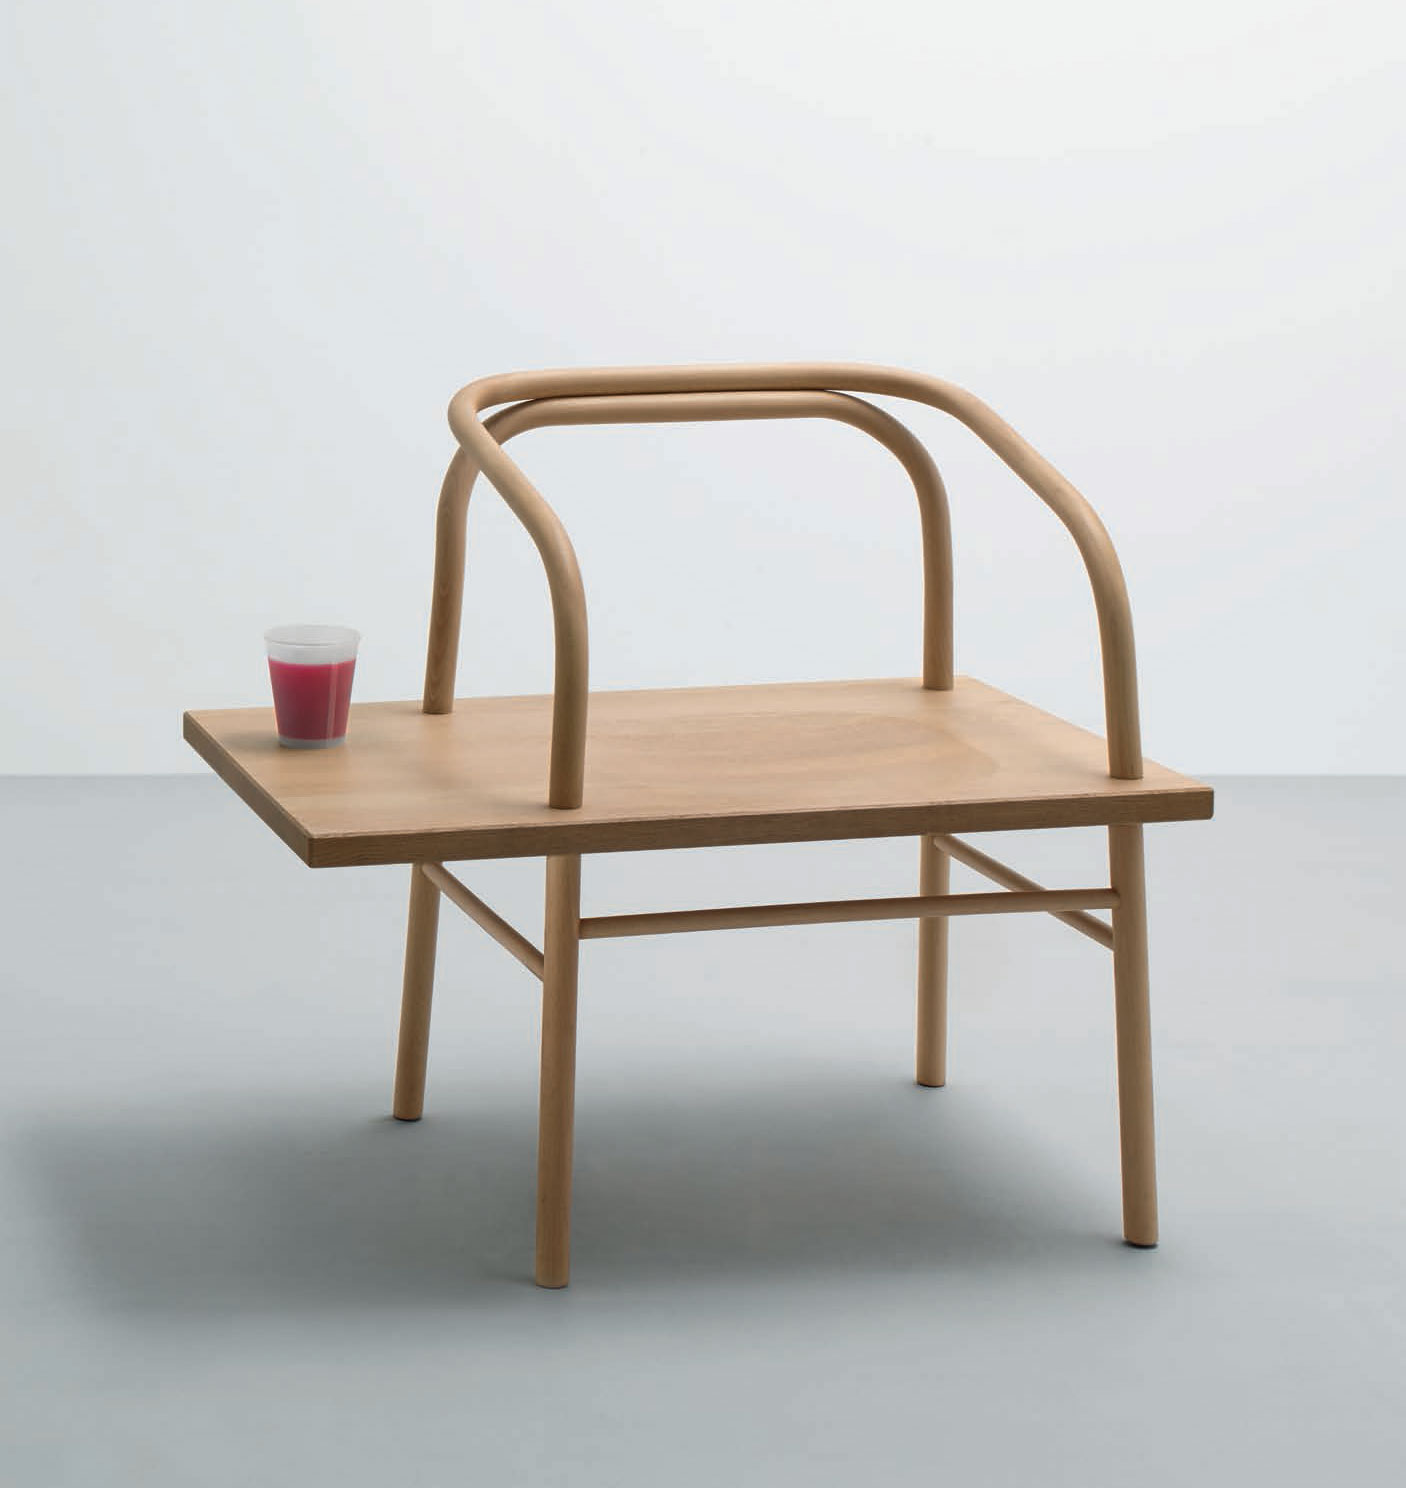 Table, Bench, Chair 2008, by Industrial Facility for Established & Sons